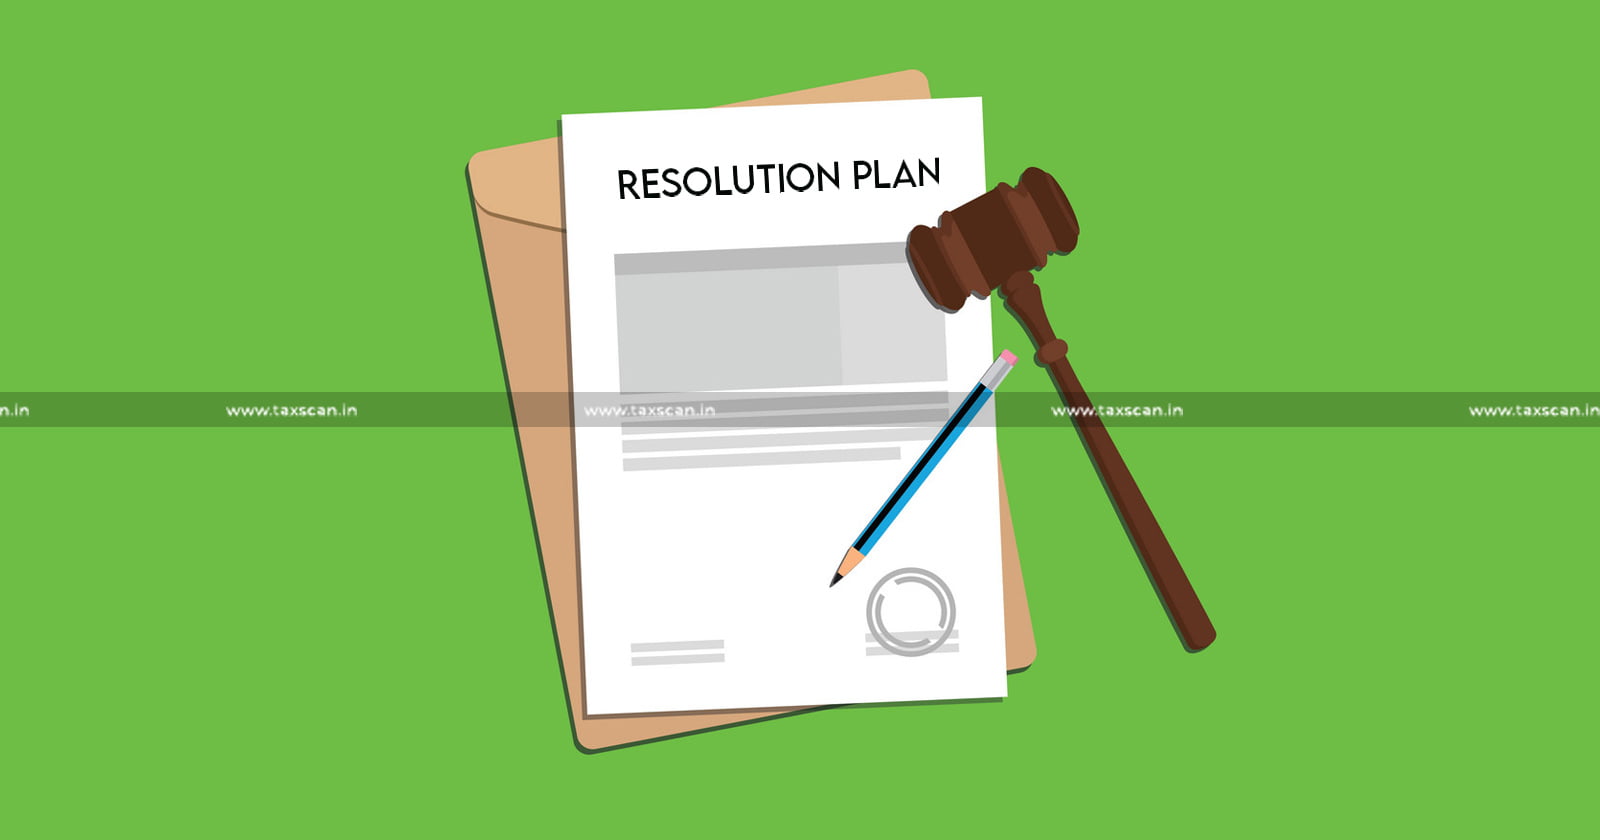 CESTAT Chandigarh - NCLT - National Company Law Tribunal - NCLT resolution plan approval - NCLT decision on appeals - Taxscan